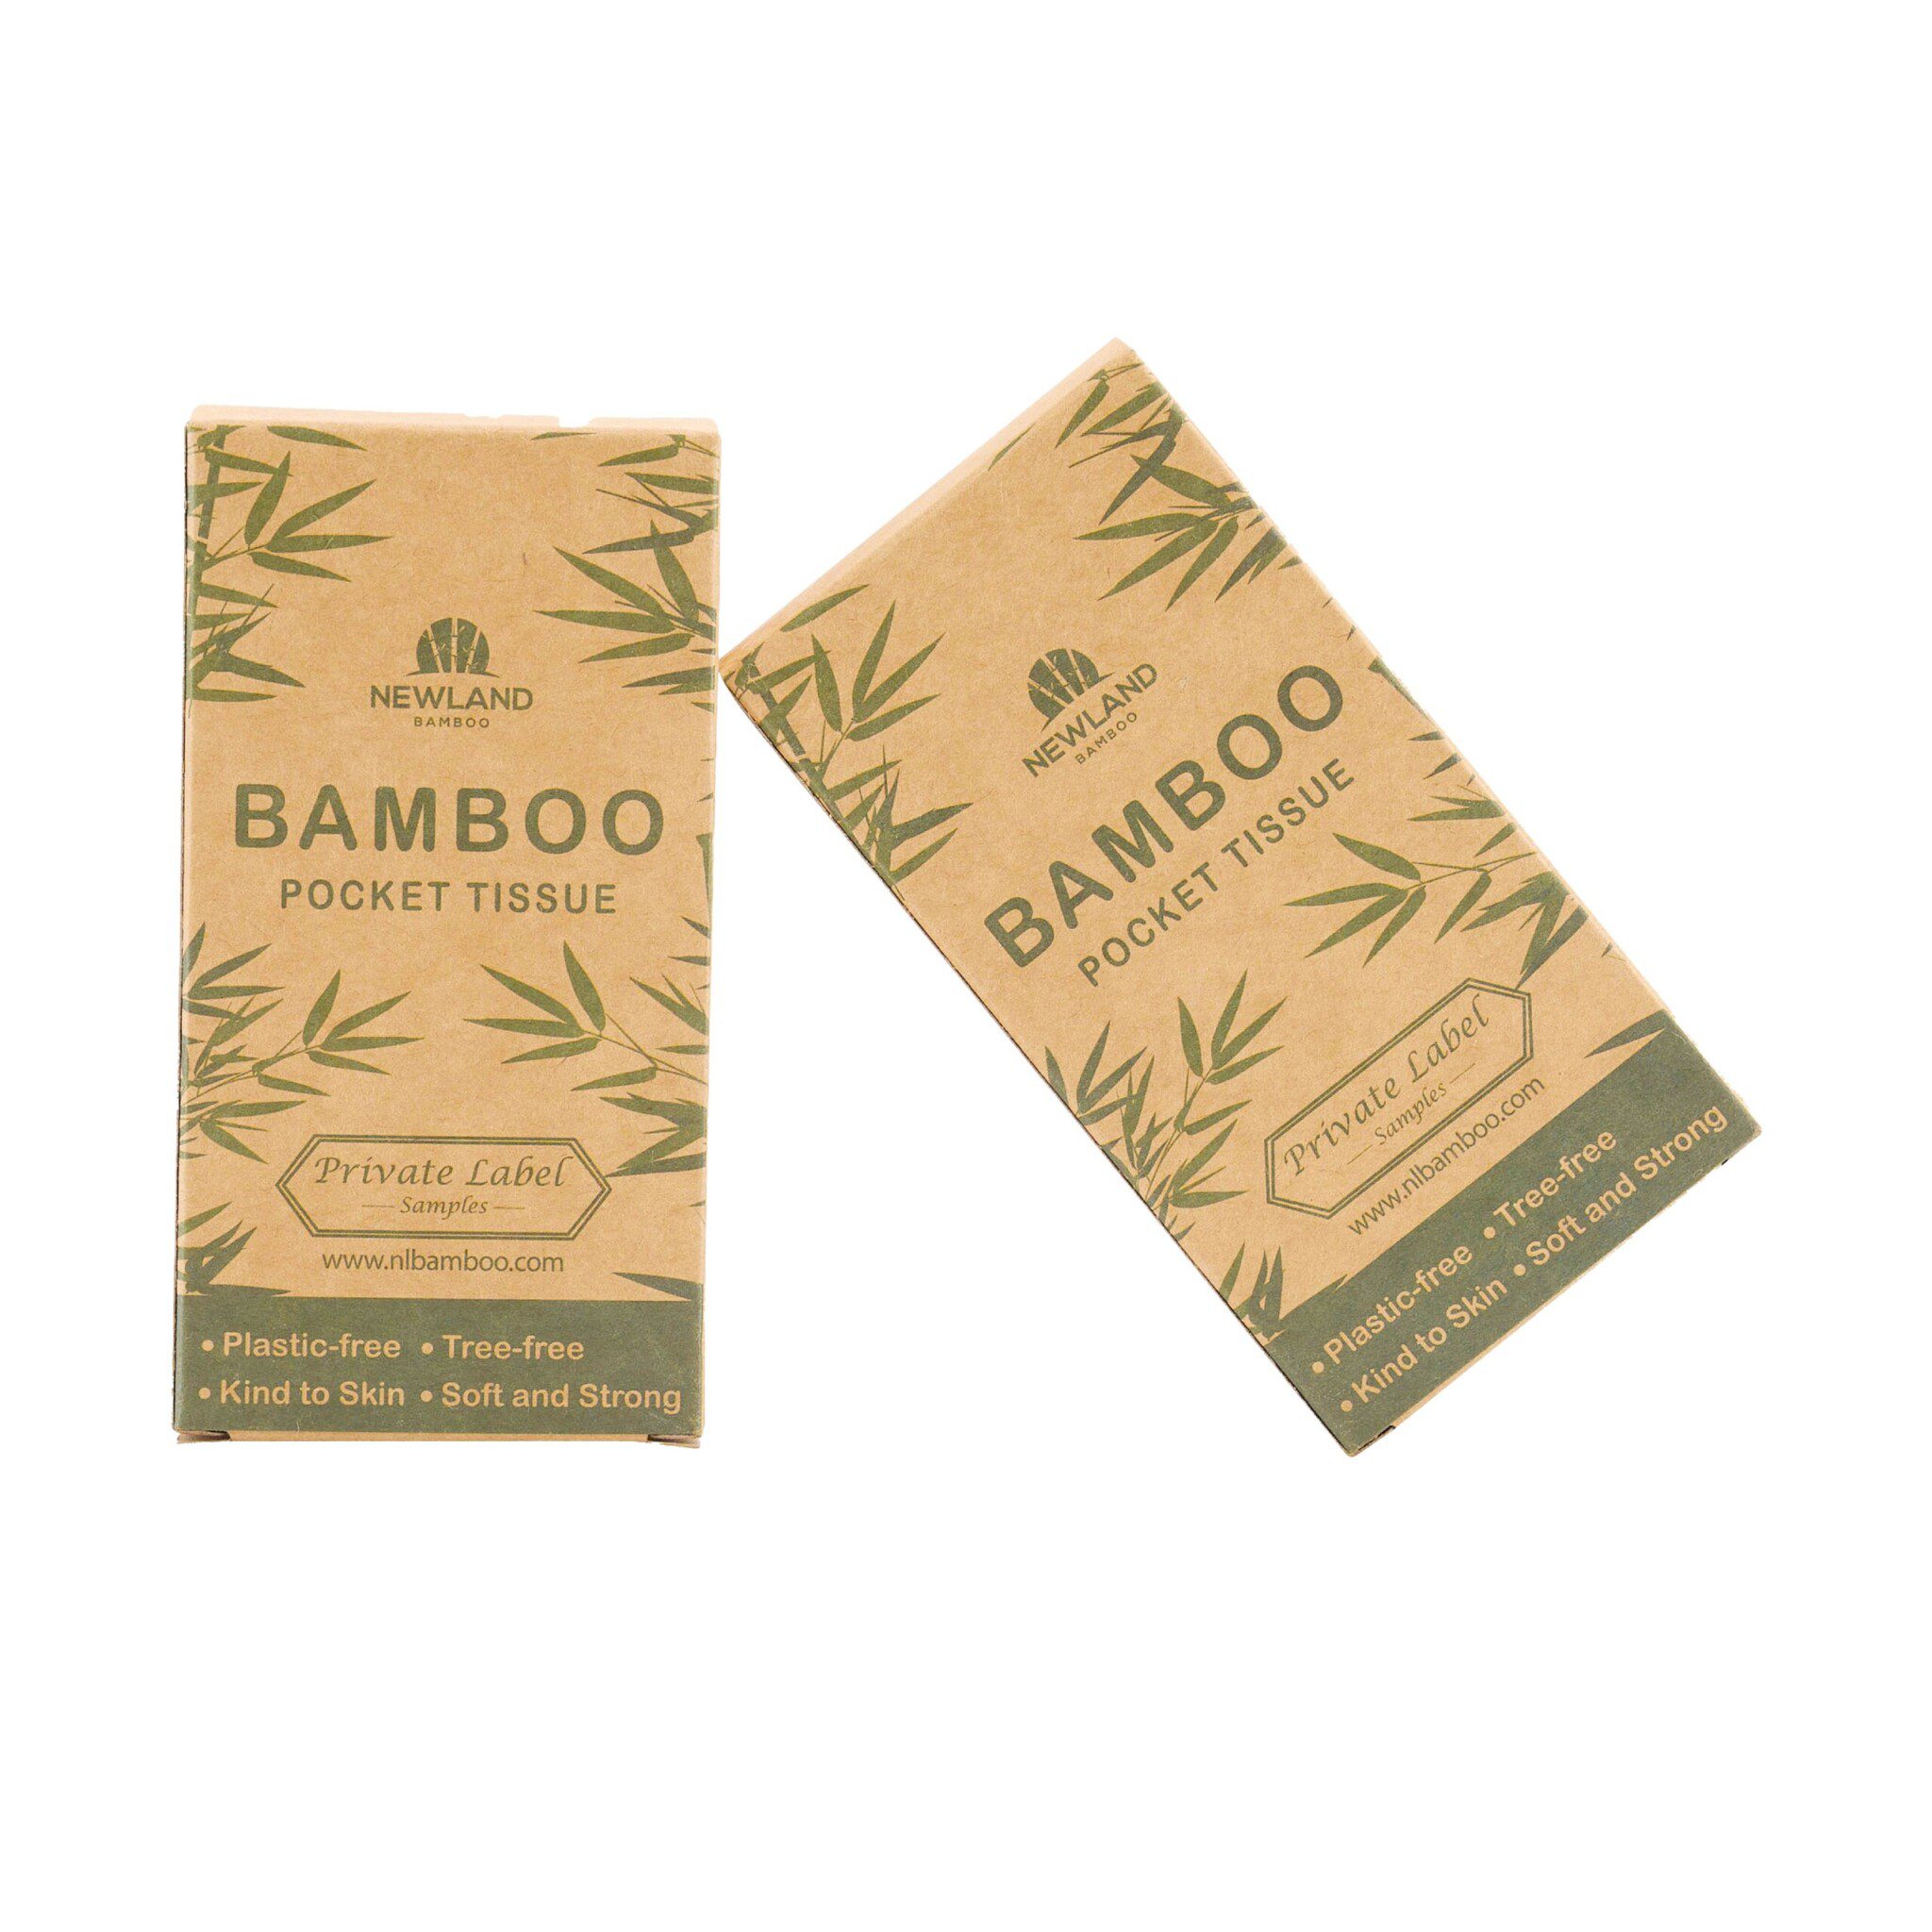 Private Label Bamboo Pocket Tissue